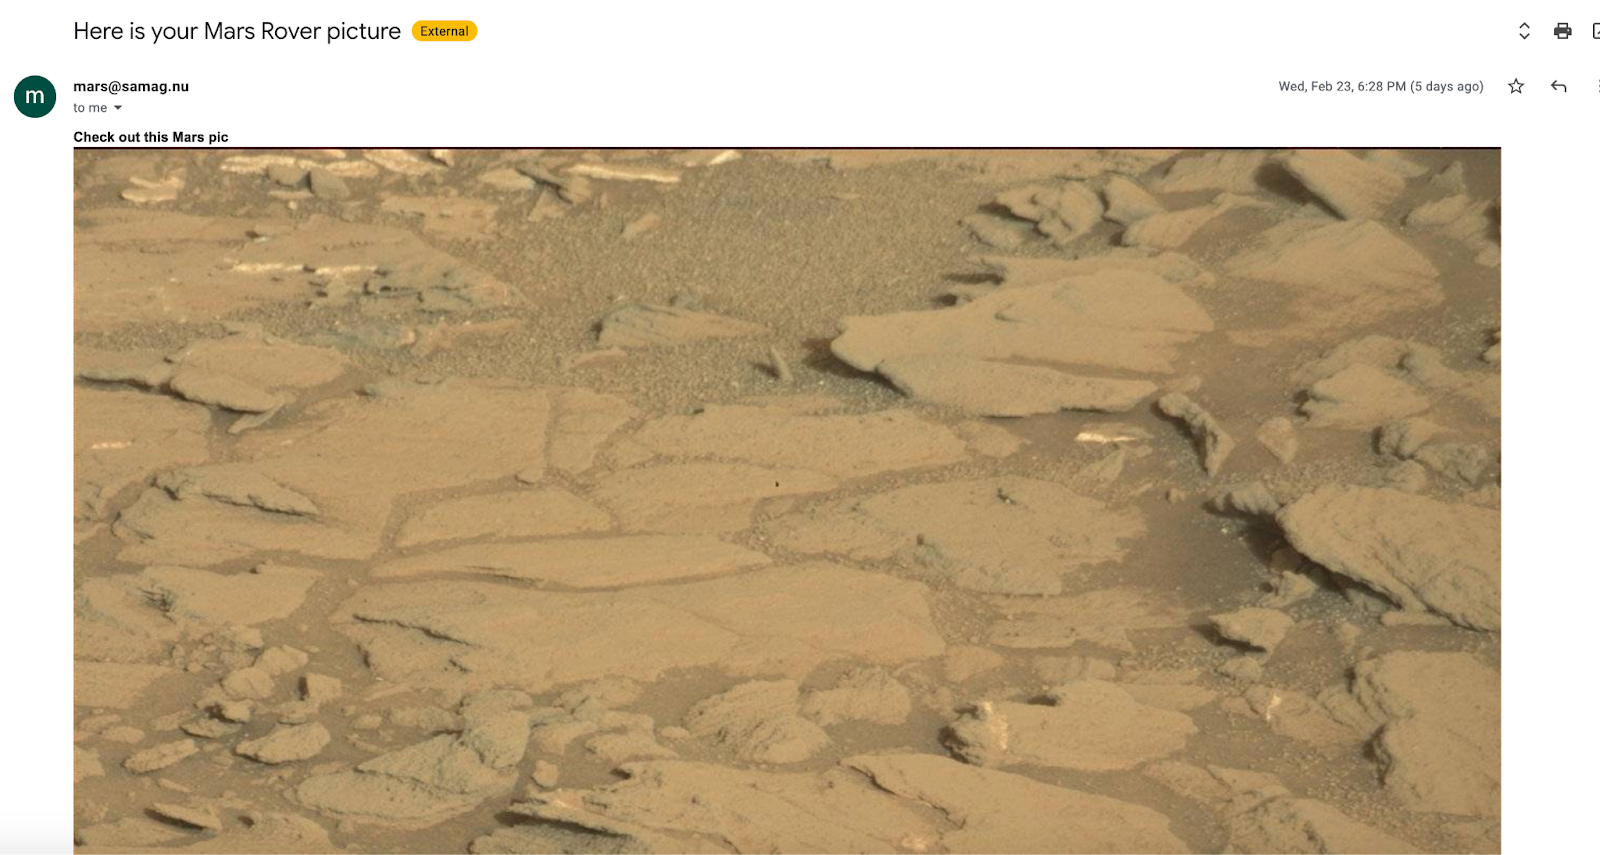 An example email send by SendGrid containing a picture taken on Mars